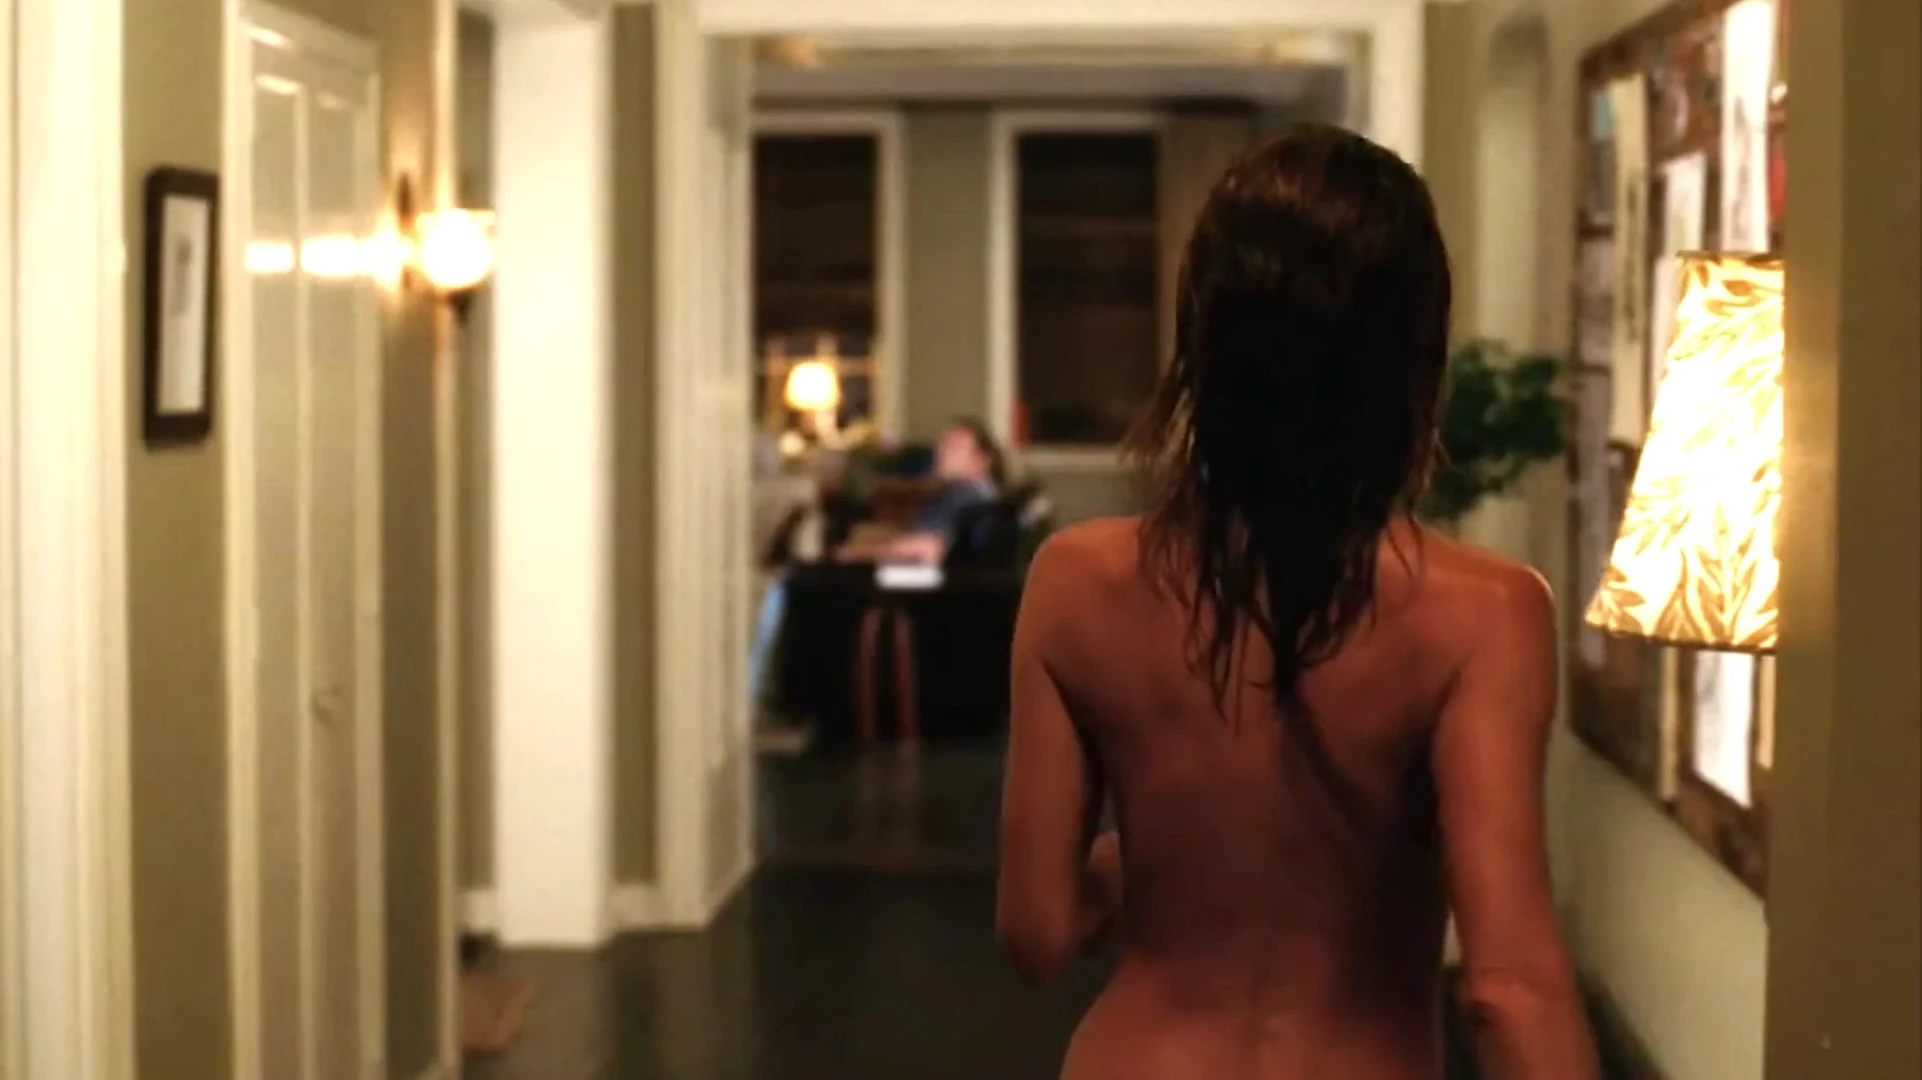 The Break-Up (2006), PG-13, Jennifer Aniston (ass). If anyone is interested, I have this sub that focuses on female nudity in PG and PG-13 movies